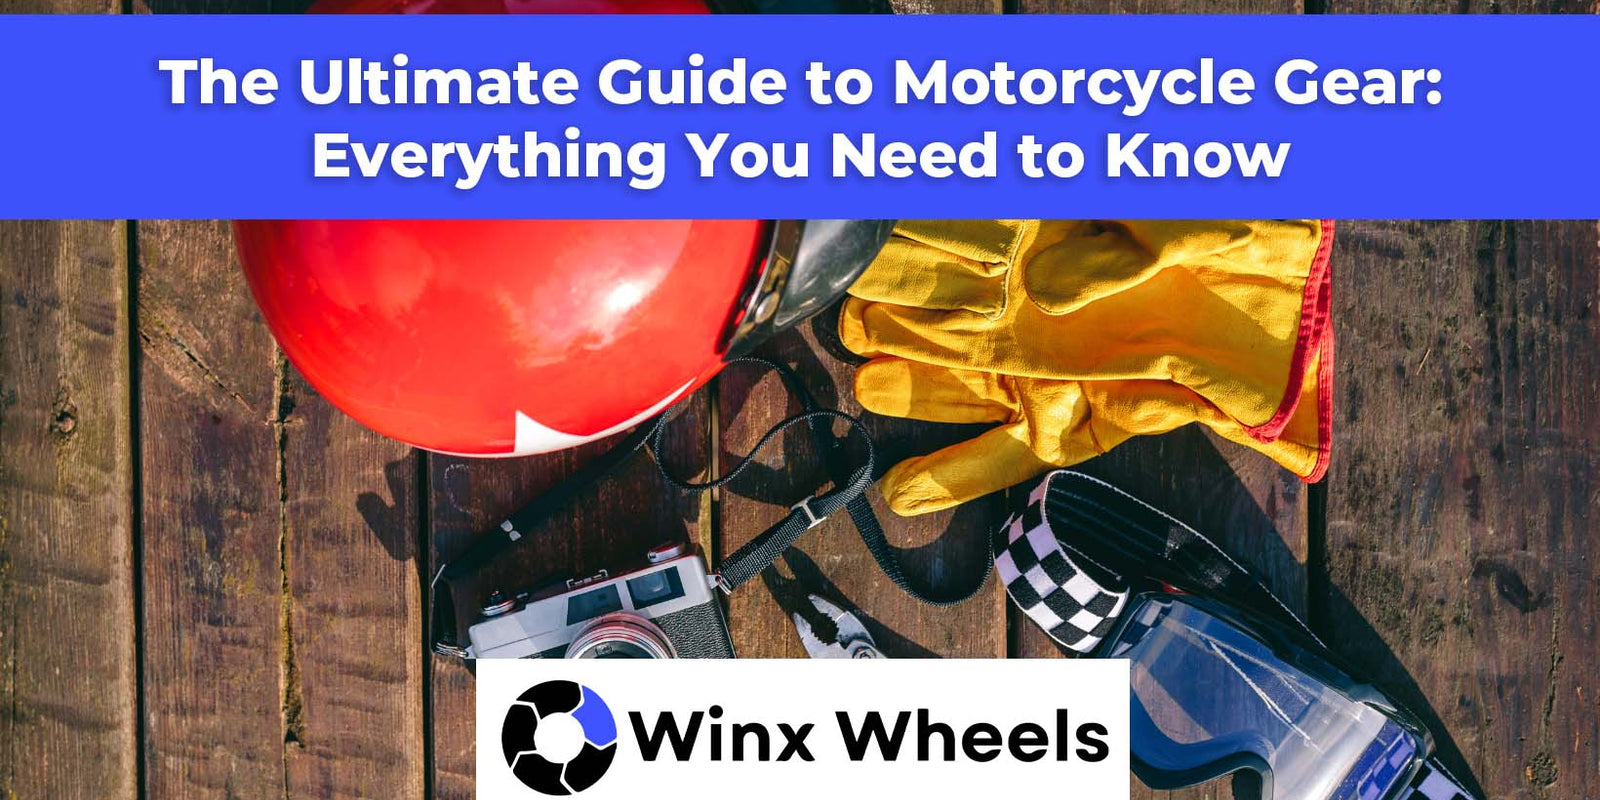 The Ultimate Guide to Motorcycle Gear: Everything You Need to Know